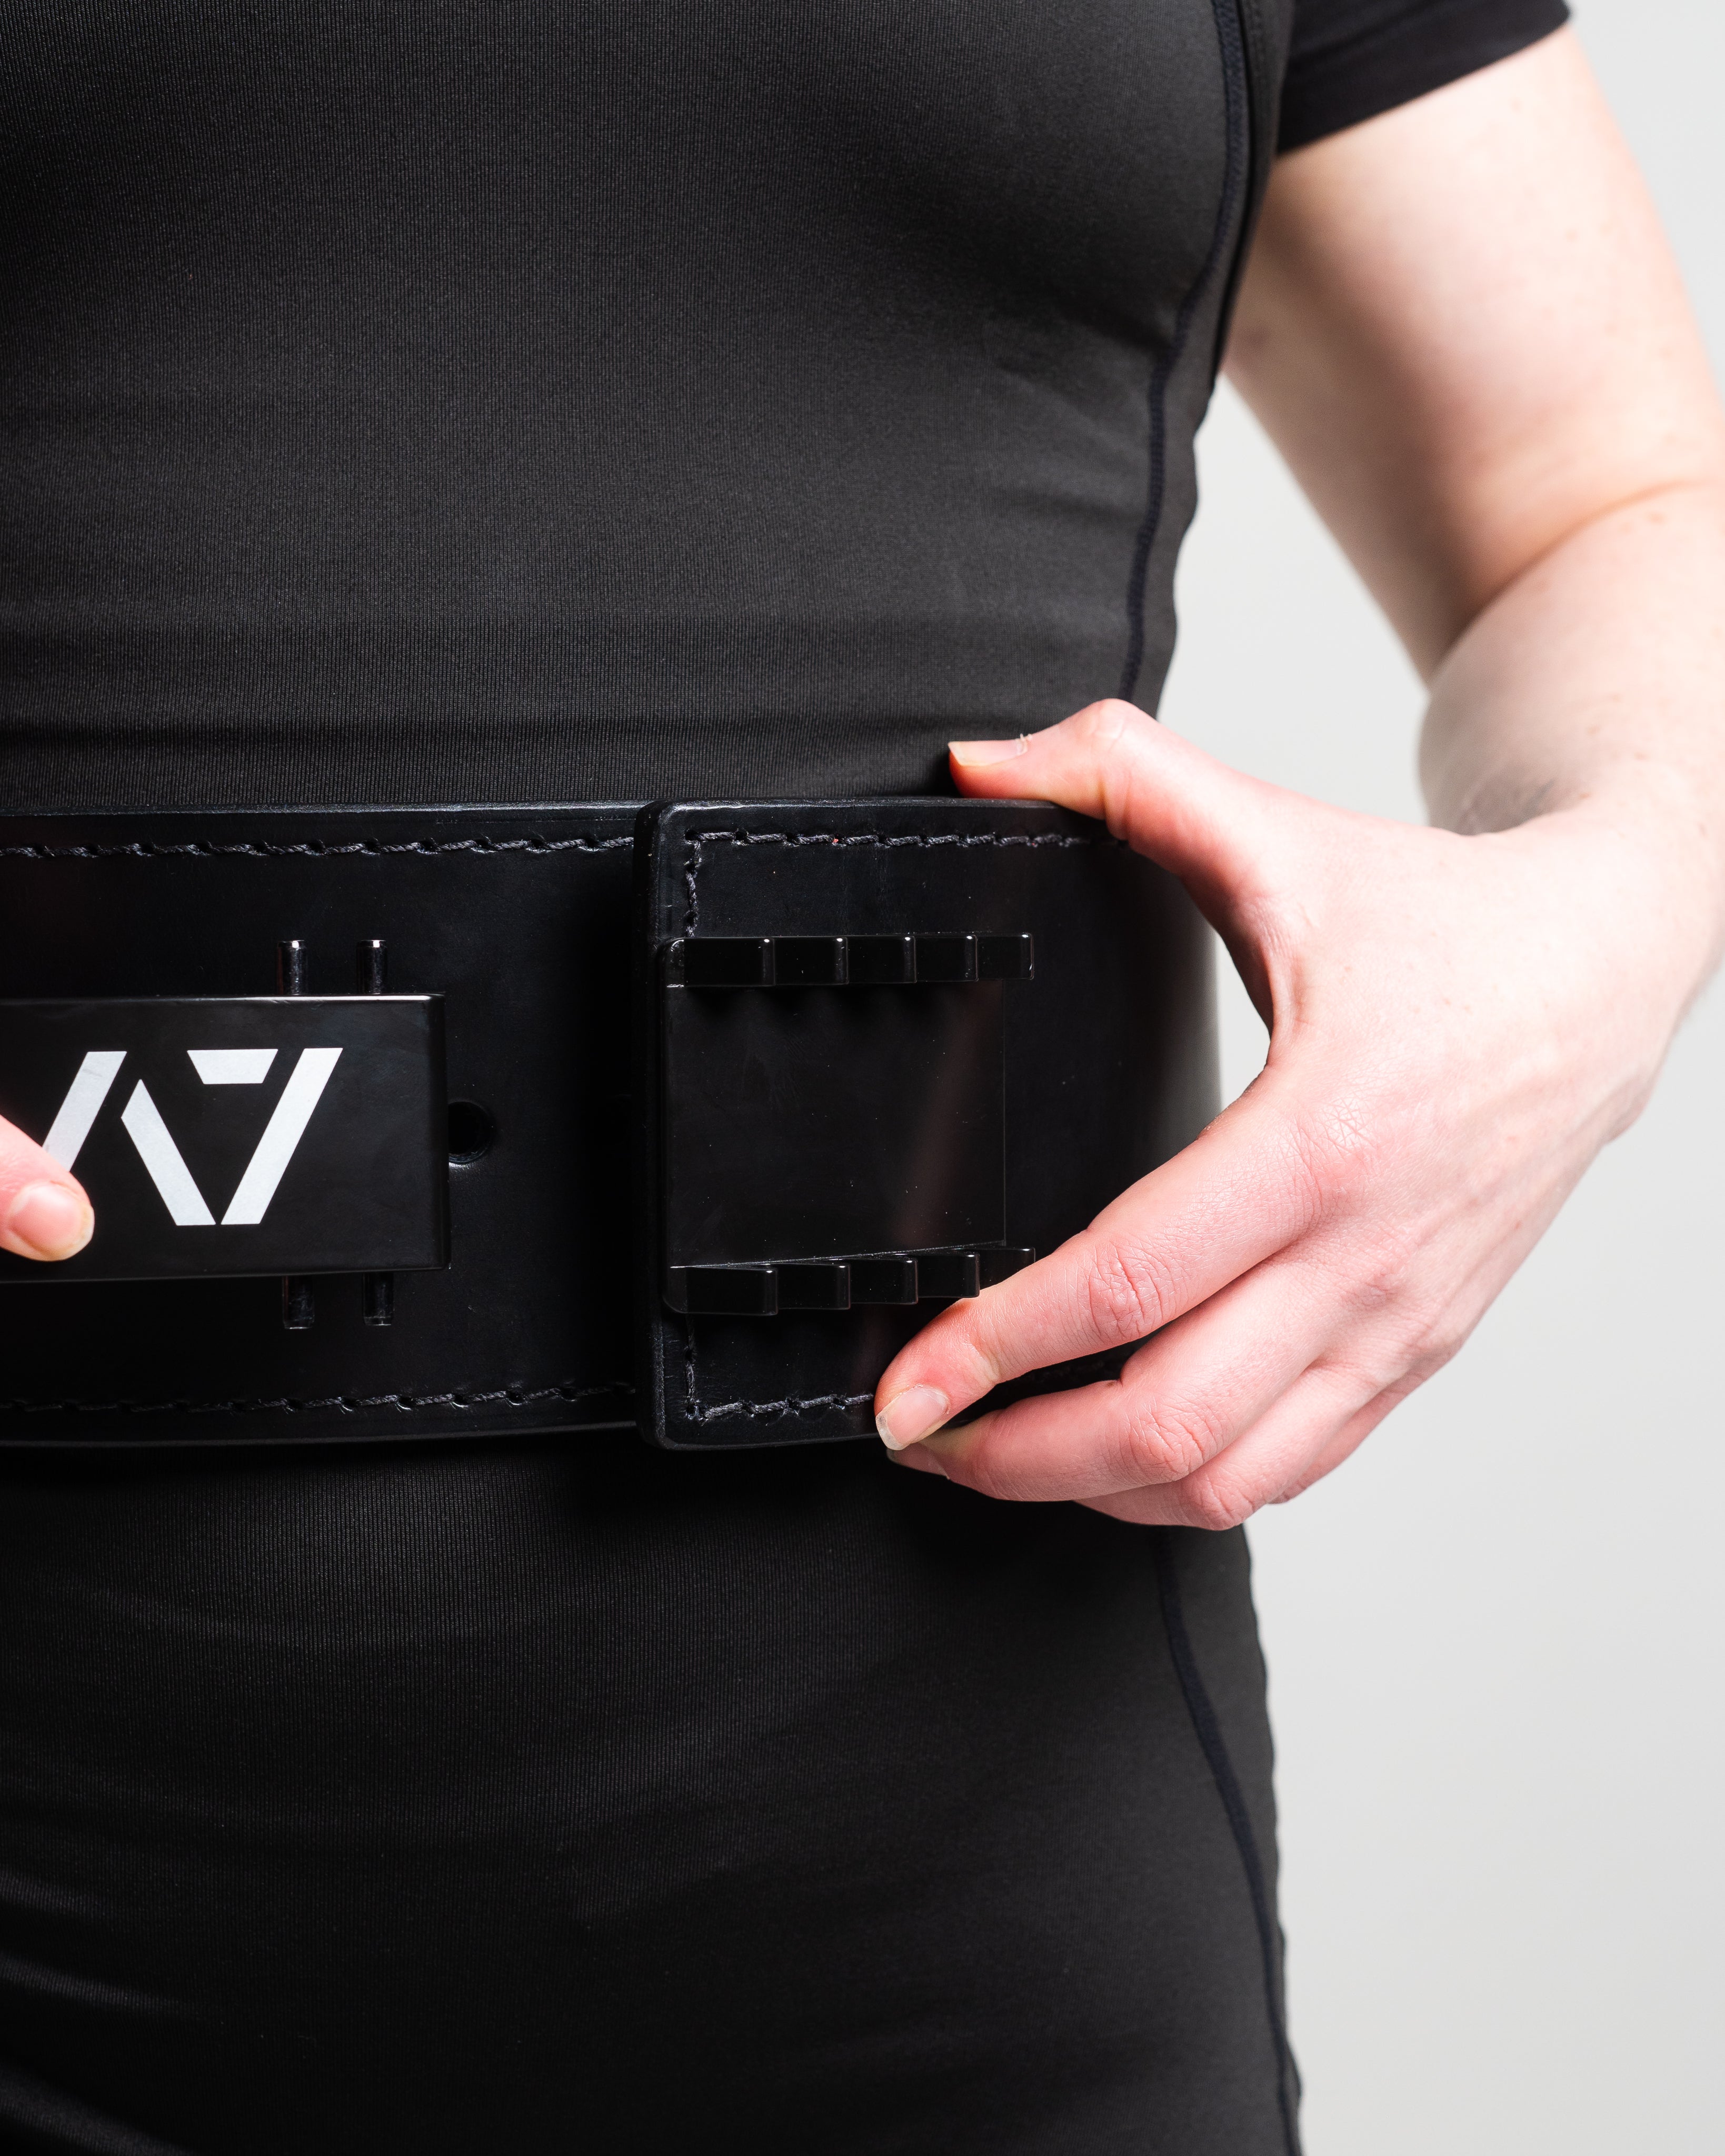 A7 IPF Approved Lever Belt features a black design with black leather, black engraved buckle and debossed A7 logo on the leather. The new Pioneer Adjustable Lever, PAL, buckle allows you to quickly adjust the tightness of your belt for a perfect fit. The IPF Approved Kit includes Singlet, A7 Meet Shirt, A7 Zebra Wrist Wraps, A7 Deadlift Socks, Hourglass Knee Sleeves (Stiff Knee Sleeves and Rigor Mortis Knee Sleeves). Genouillères powerlifting shipping to France, Spain, Ireland, Germany, Italy and EU.